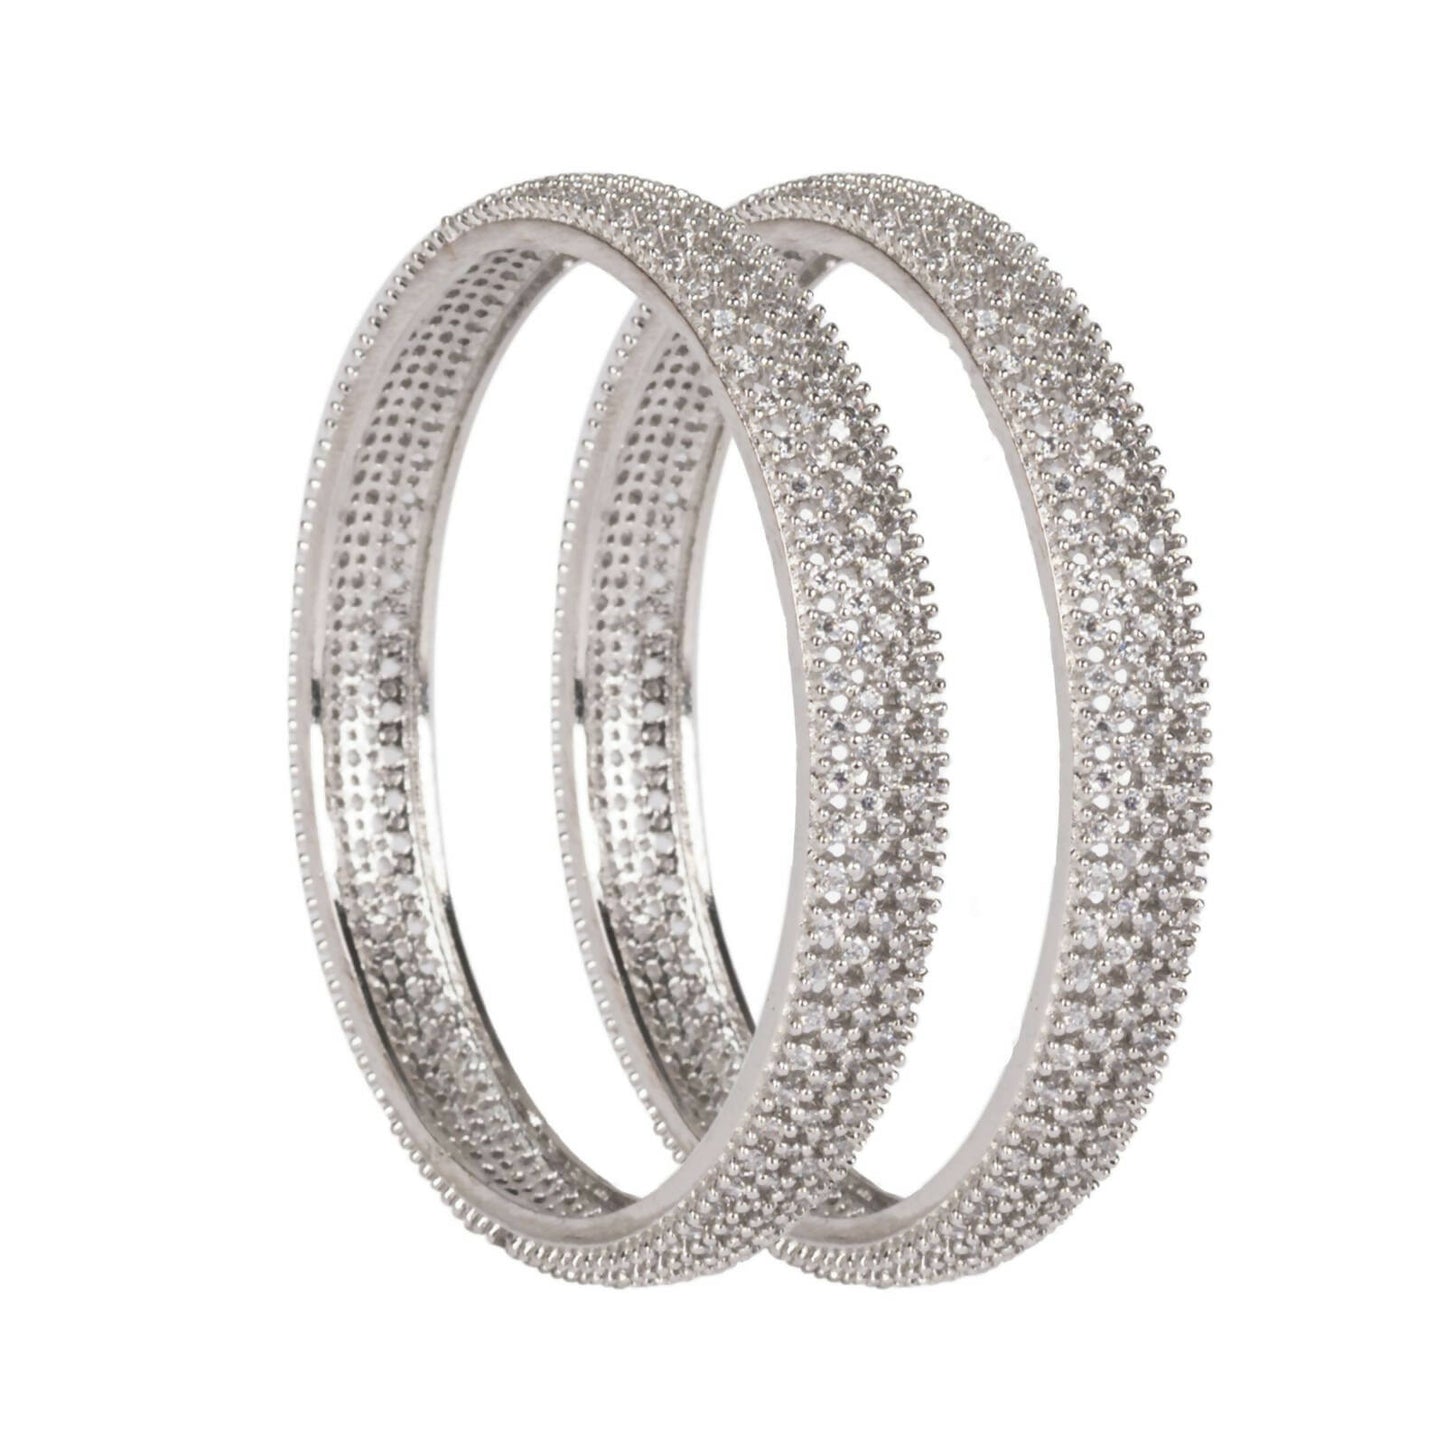 Silver plated ethnic bangles